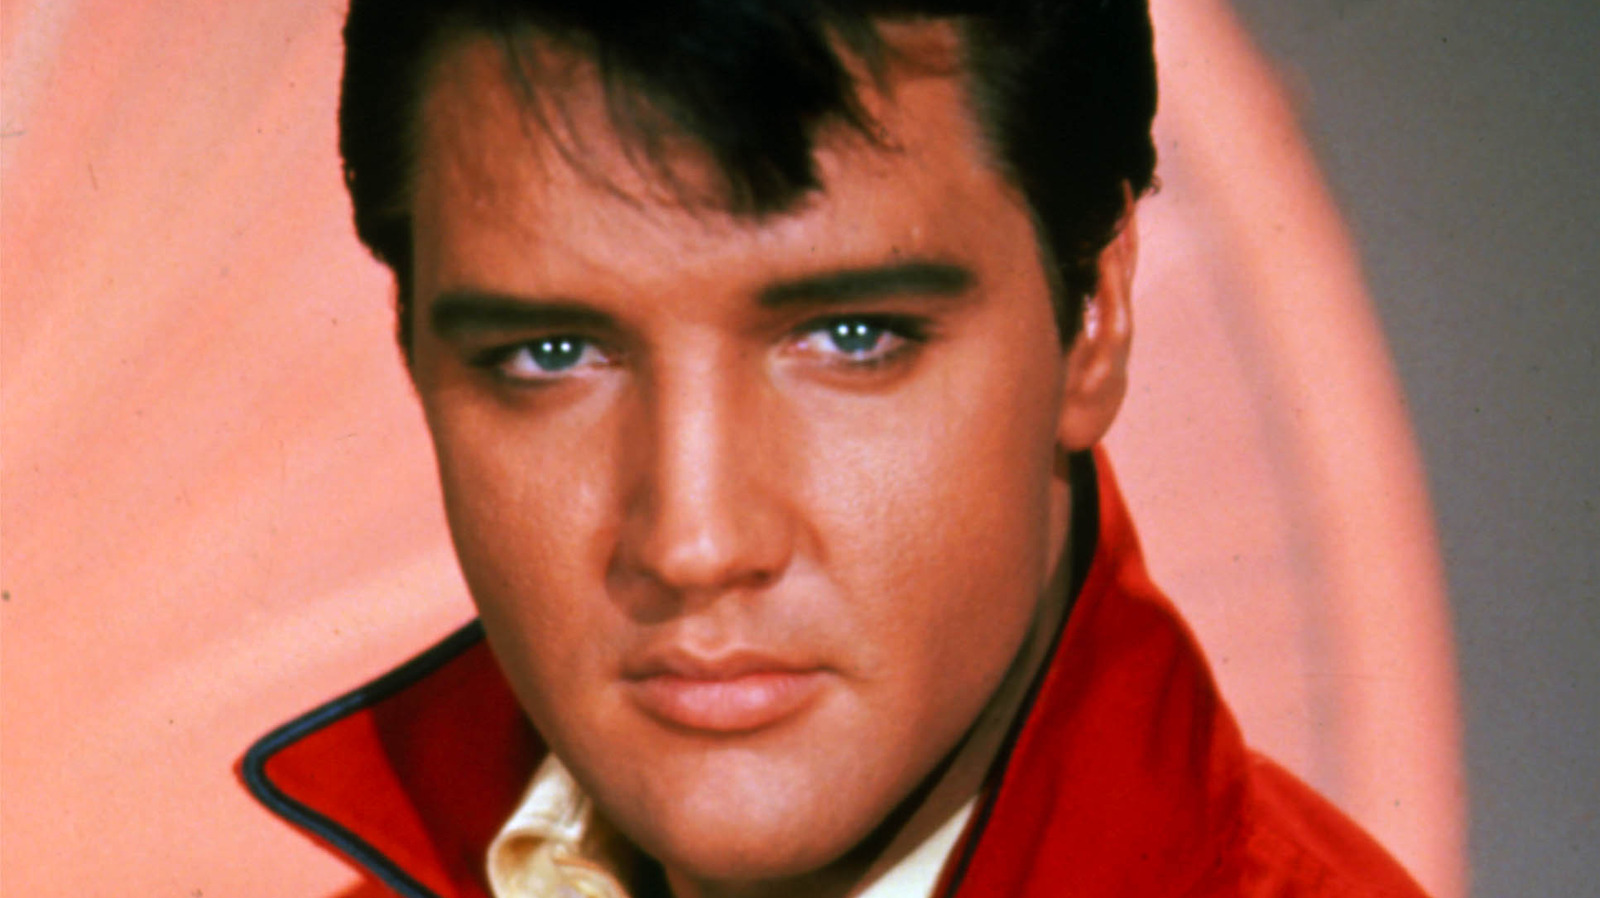 What We Learned About Elvis Presley's Health After His Death